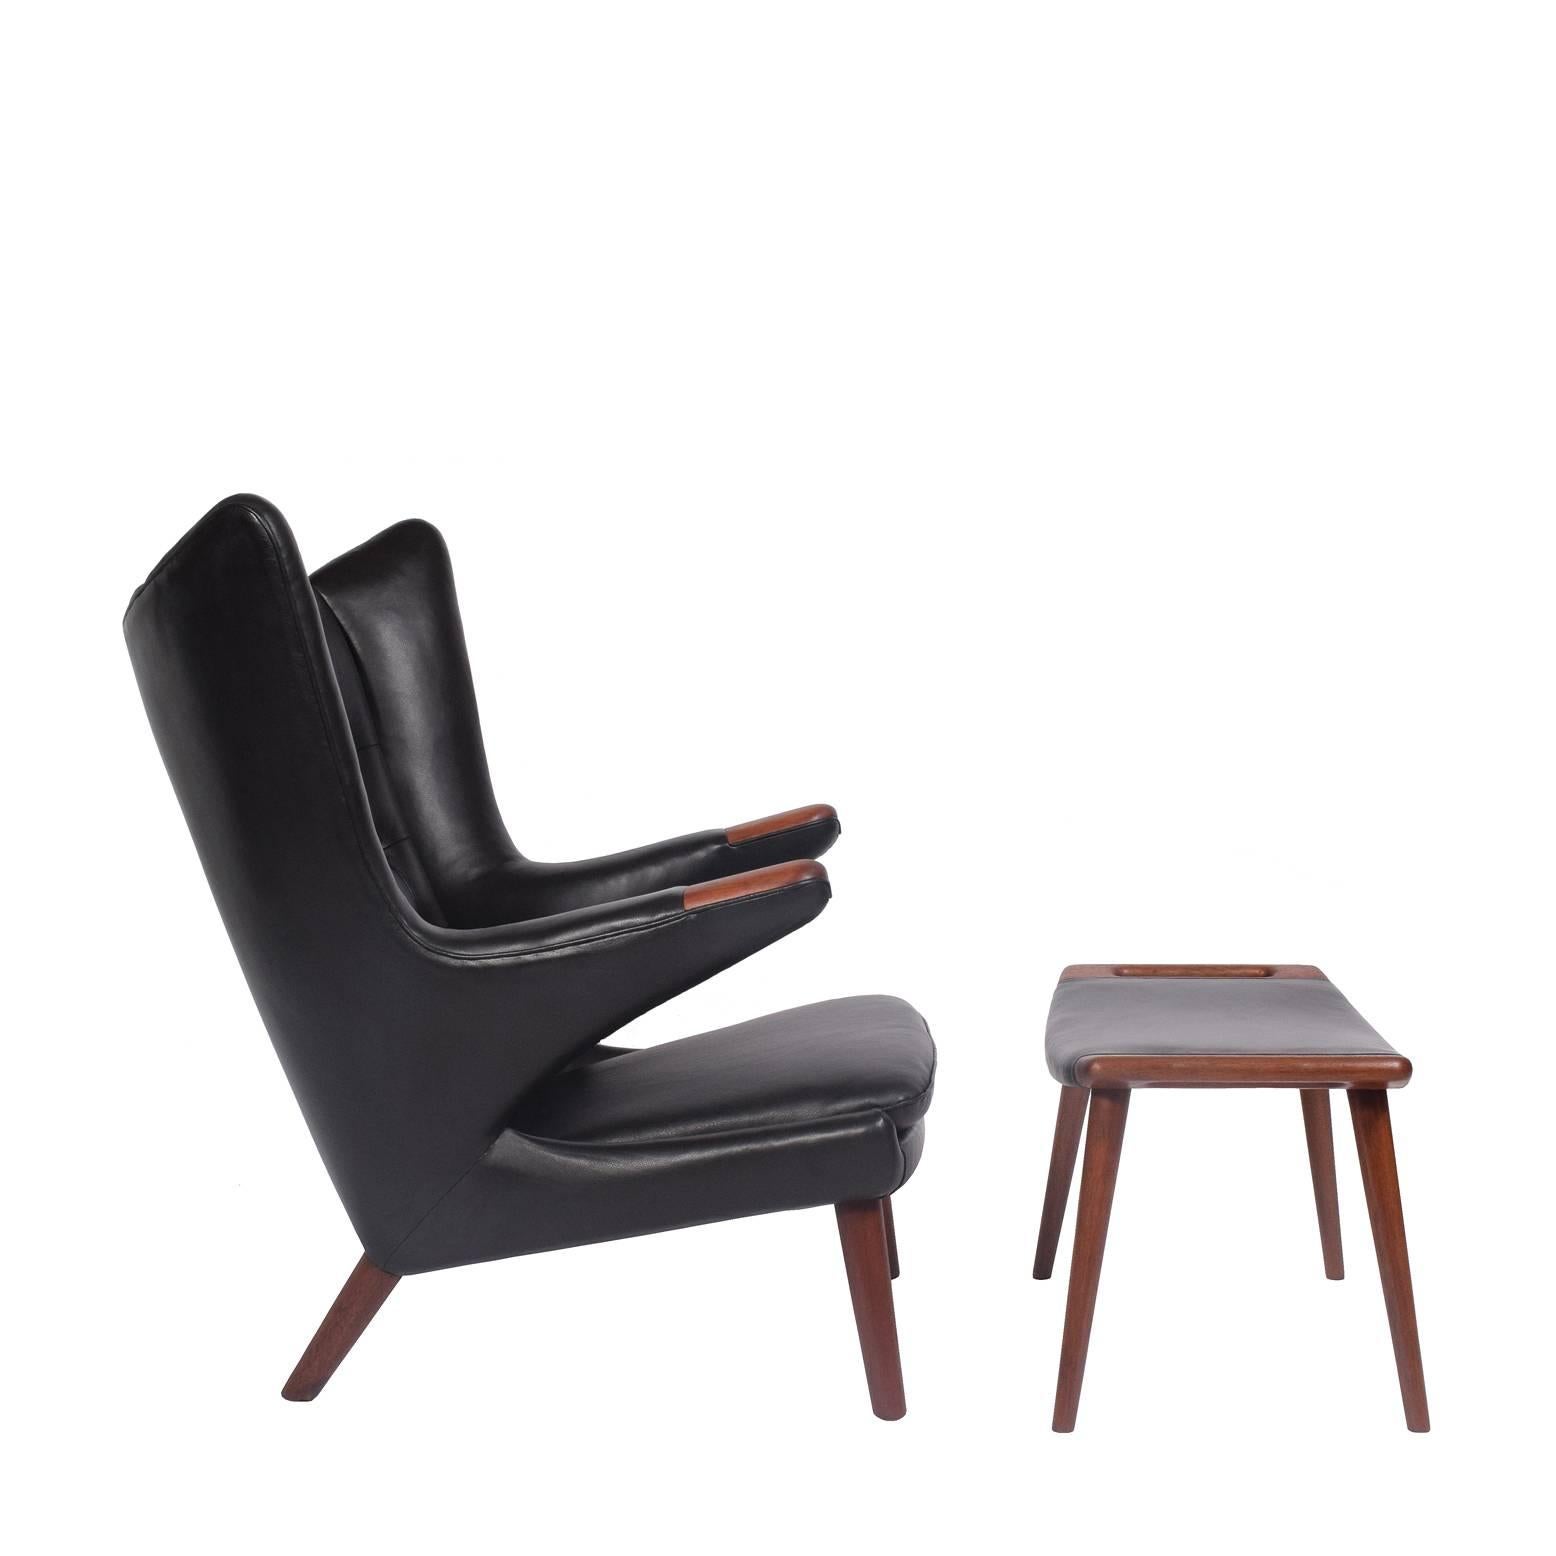 Iconic lounge chair and ottoman by Wegner, with solid teak legs and arm. Ottoman solid teak frame. Reupholstered in black leather.
Early 1950s production. Made by A.P. Stolen.